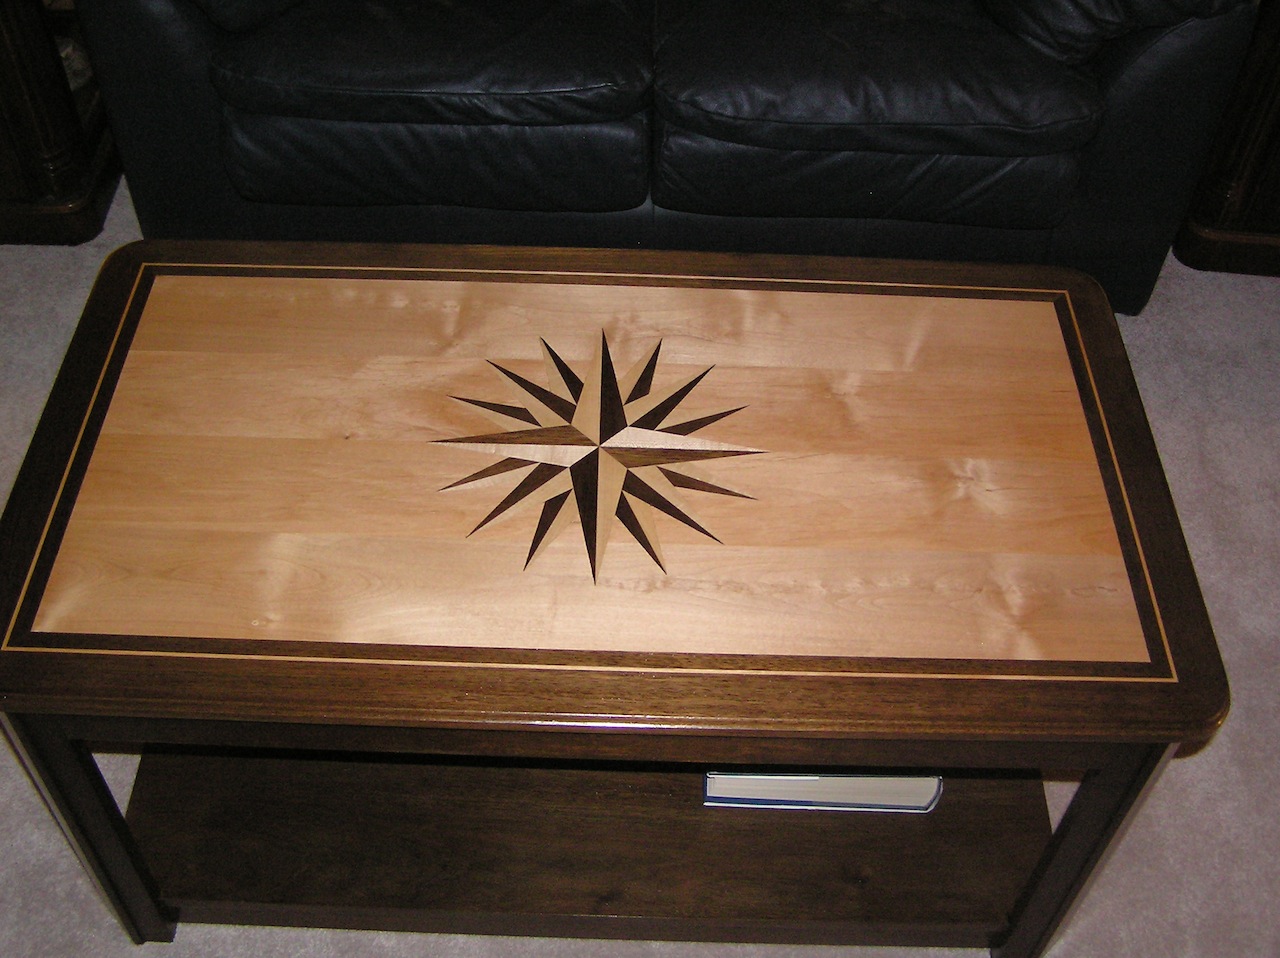 Ronn's Coffee Table With Compass Inlay - The Wood Whisperer